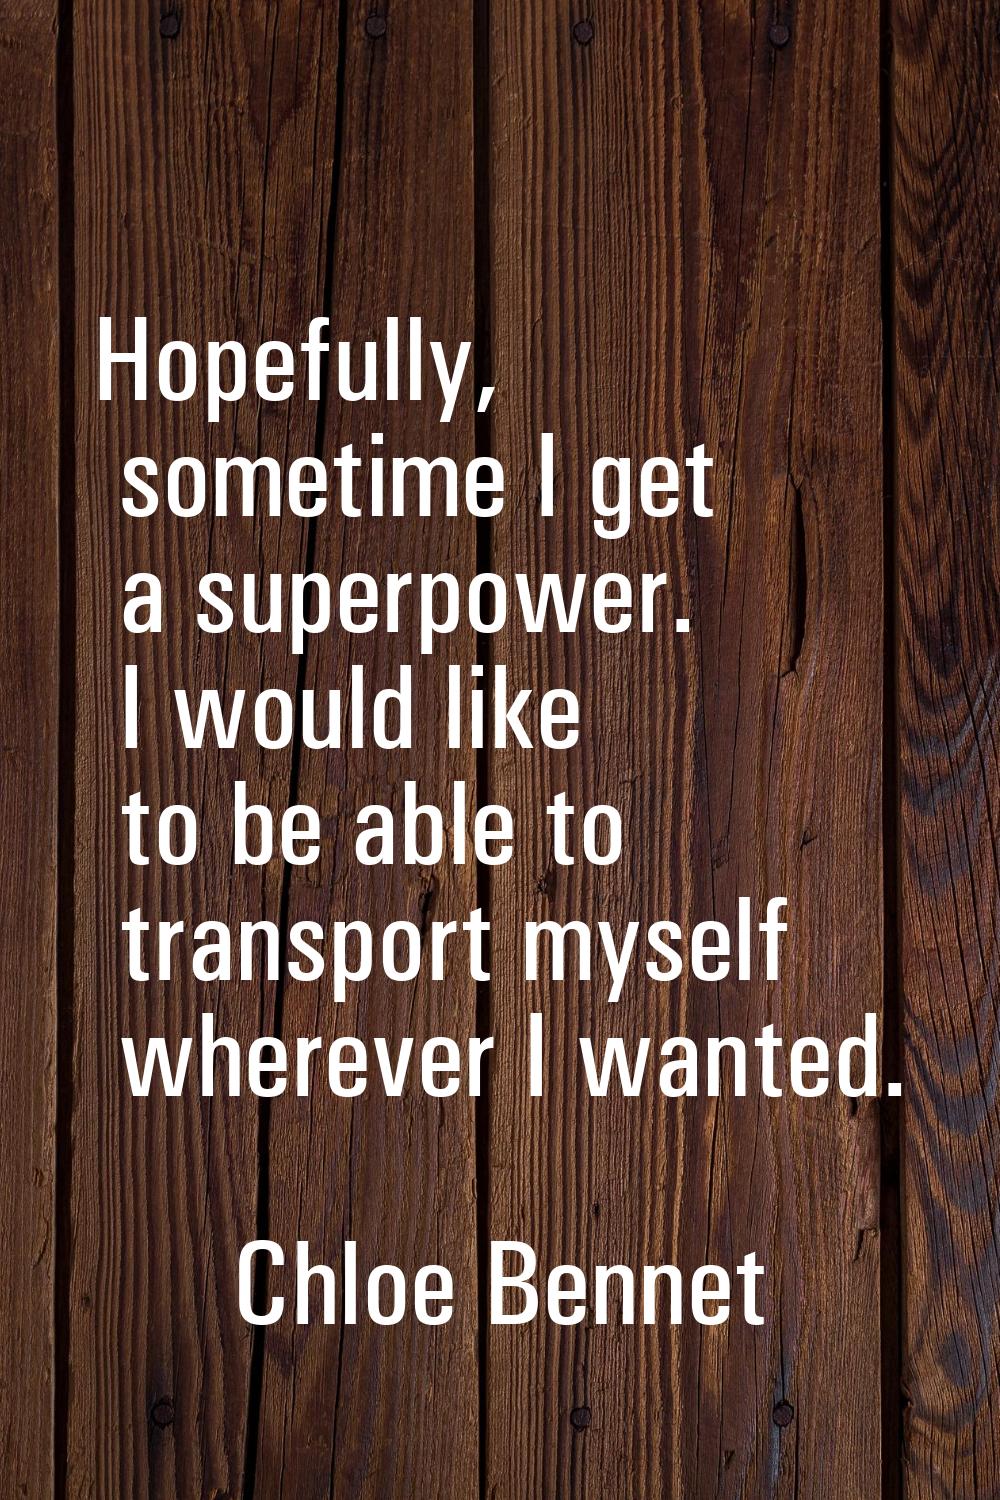 Hopefully, sometime I get a superpower. I would like to be able to transport myself wherever I want